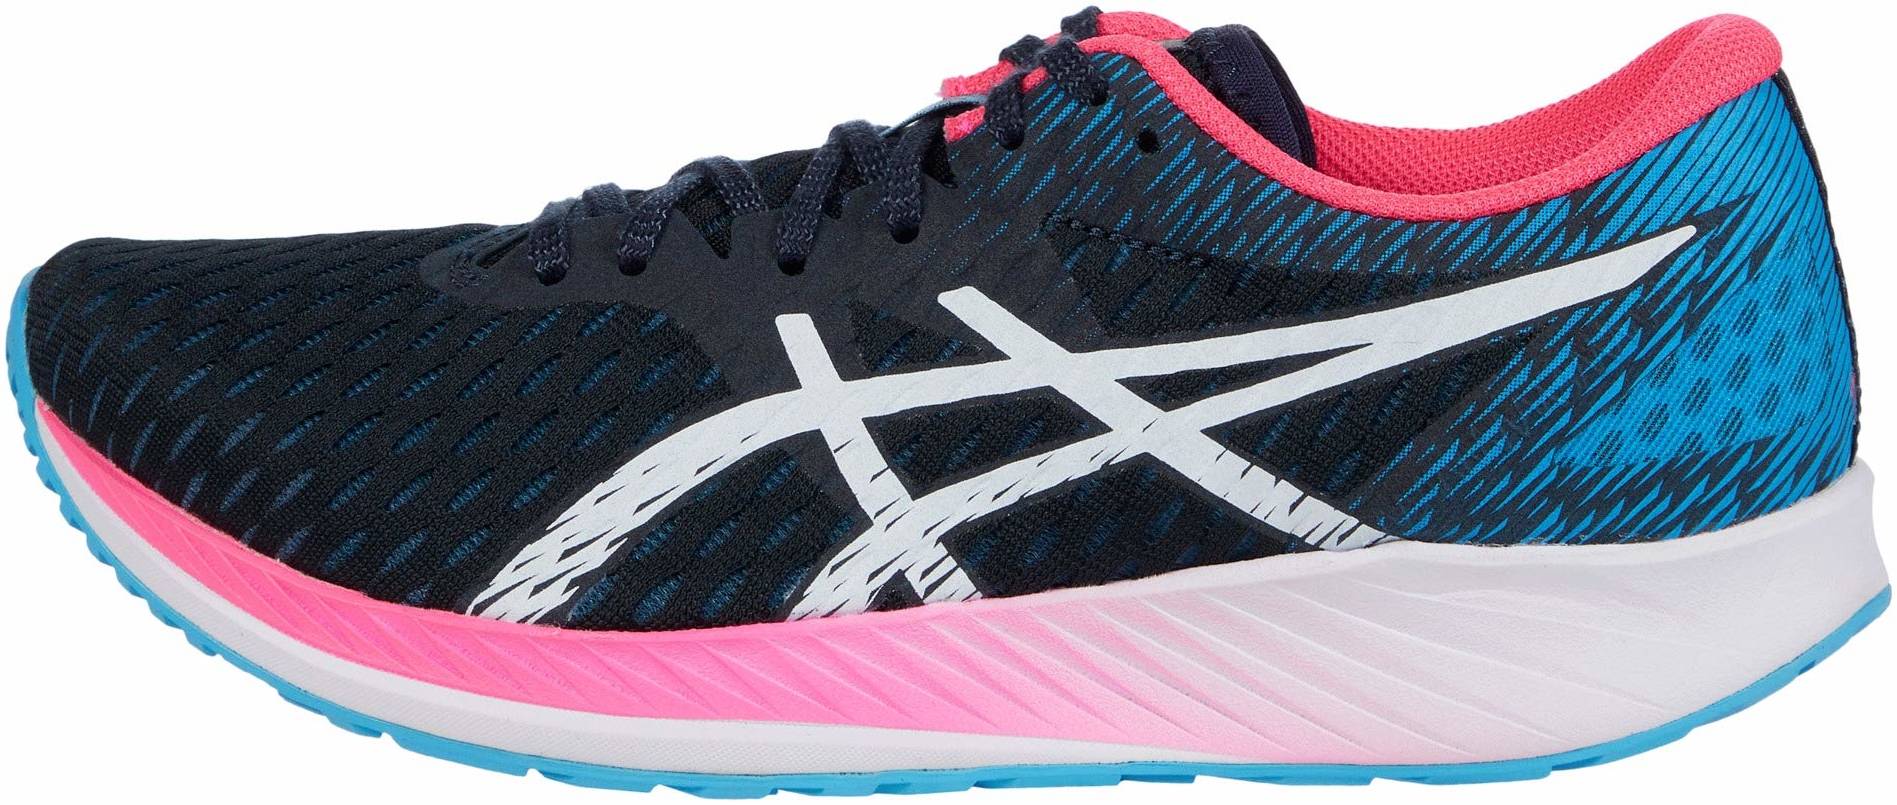 asics speed shoes